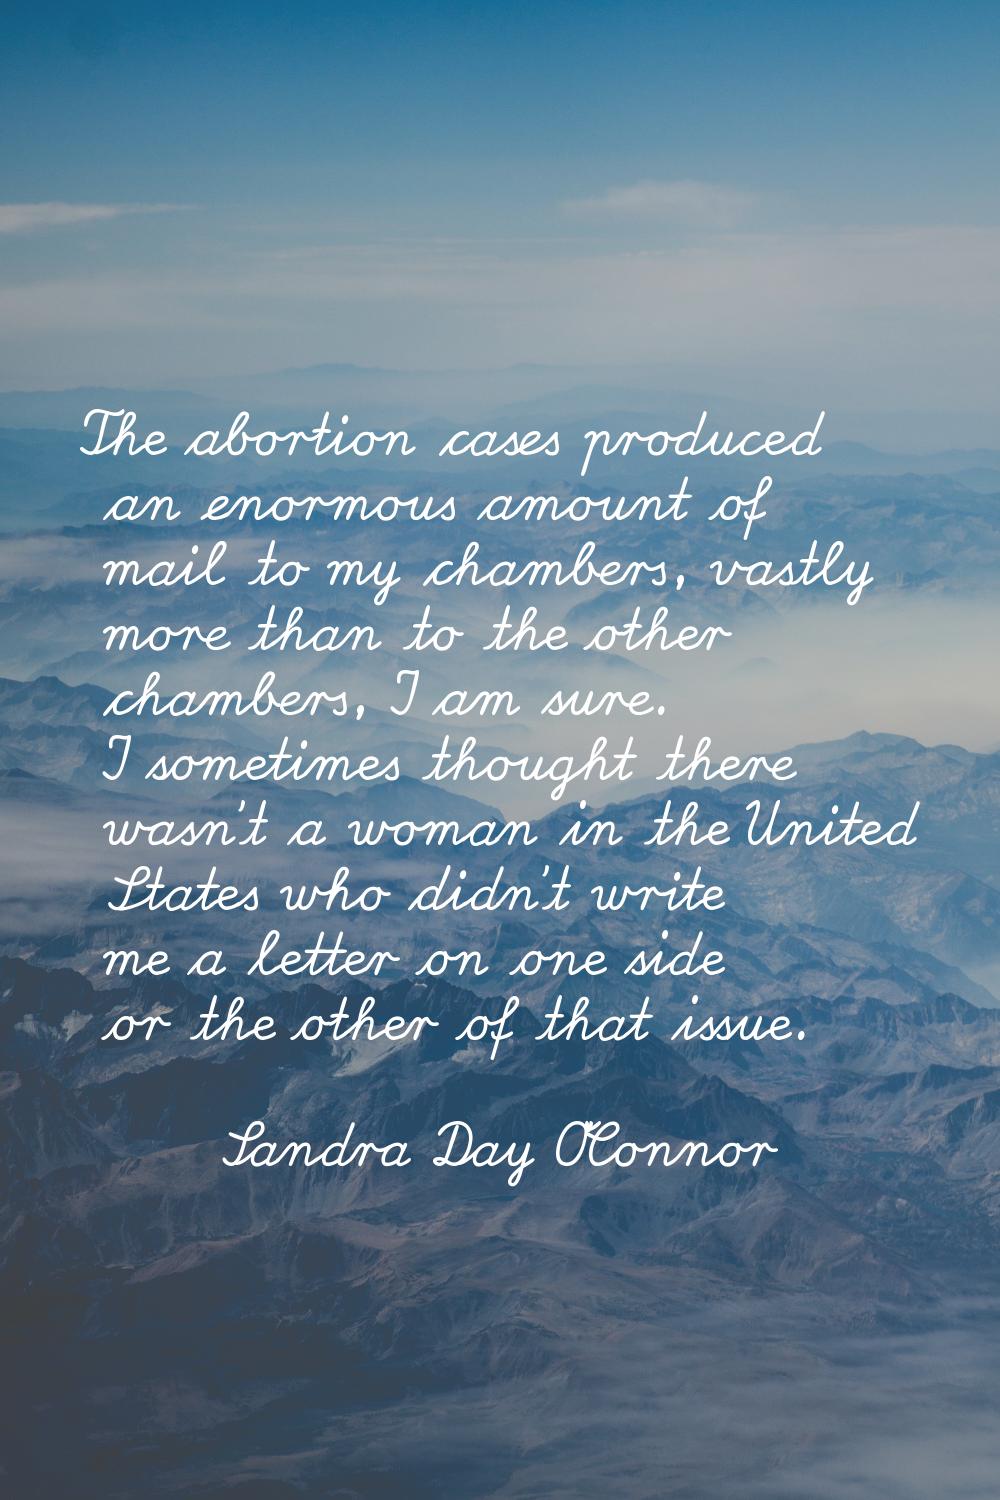 The abortion cases produced an enormous amount of mail to my chambers, vastly more than to the othe